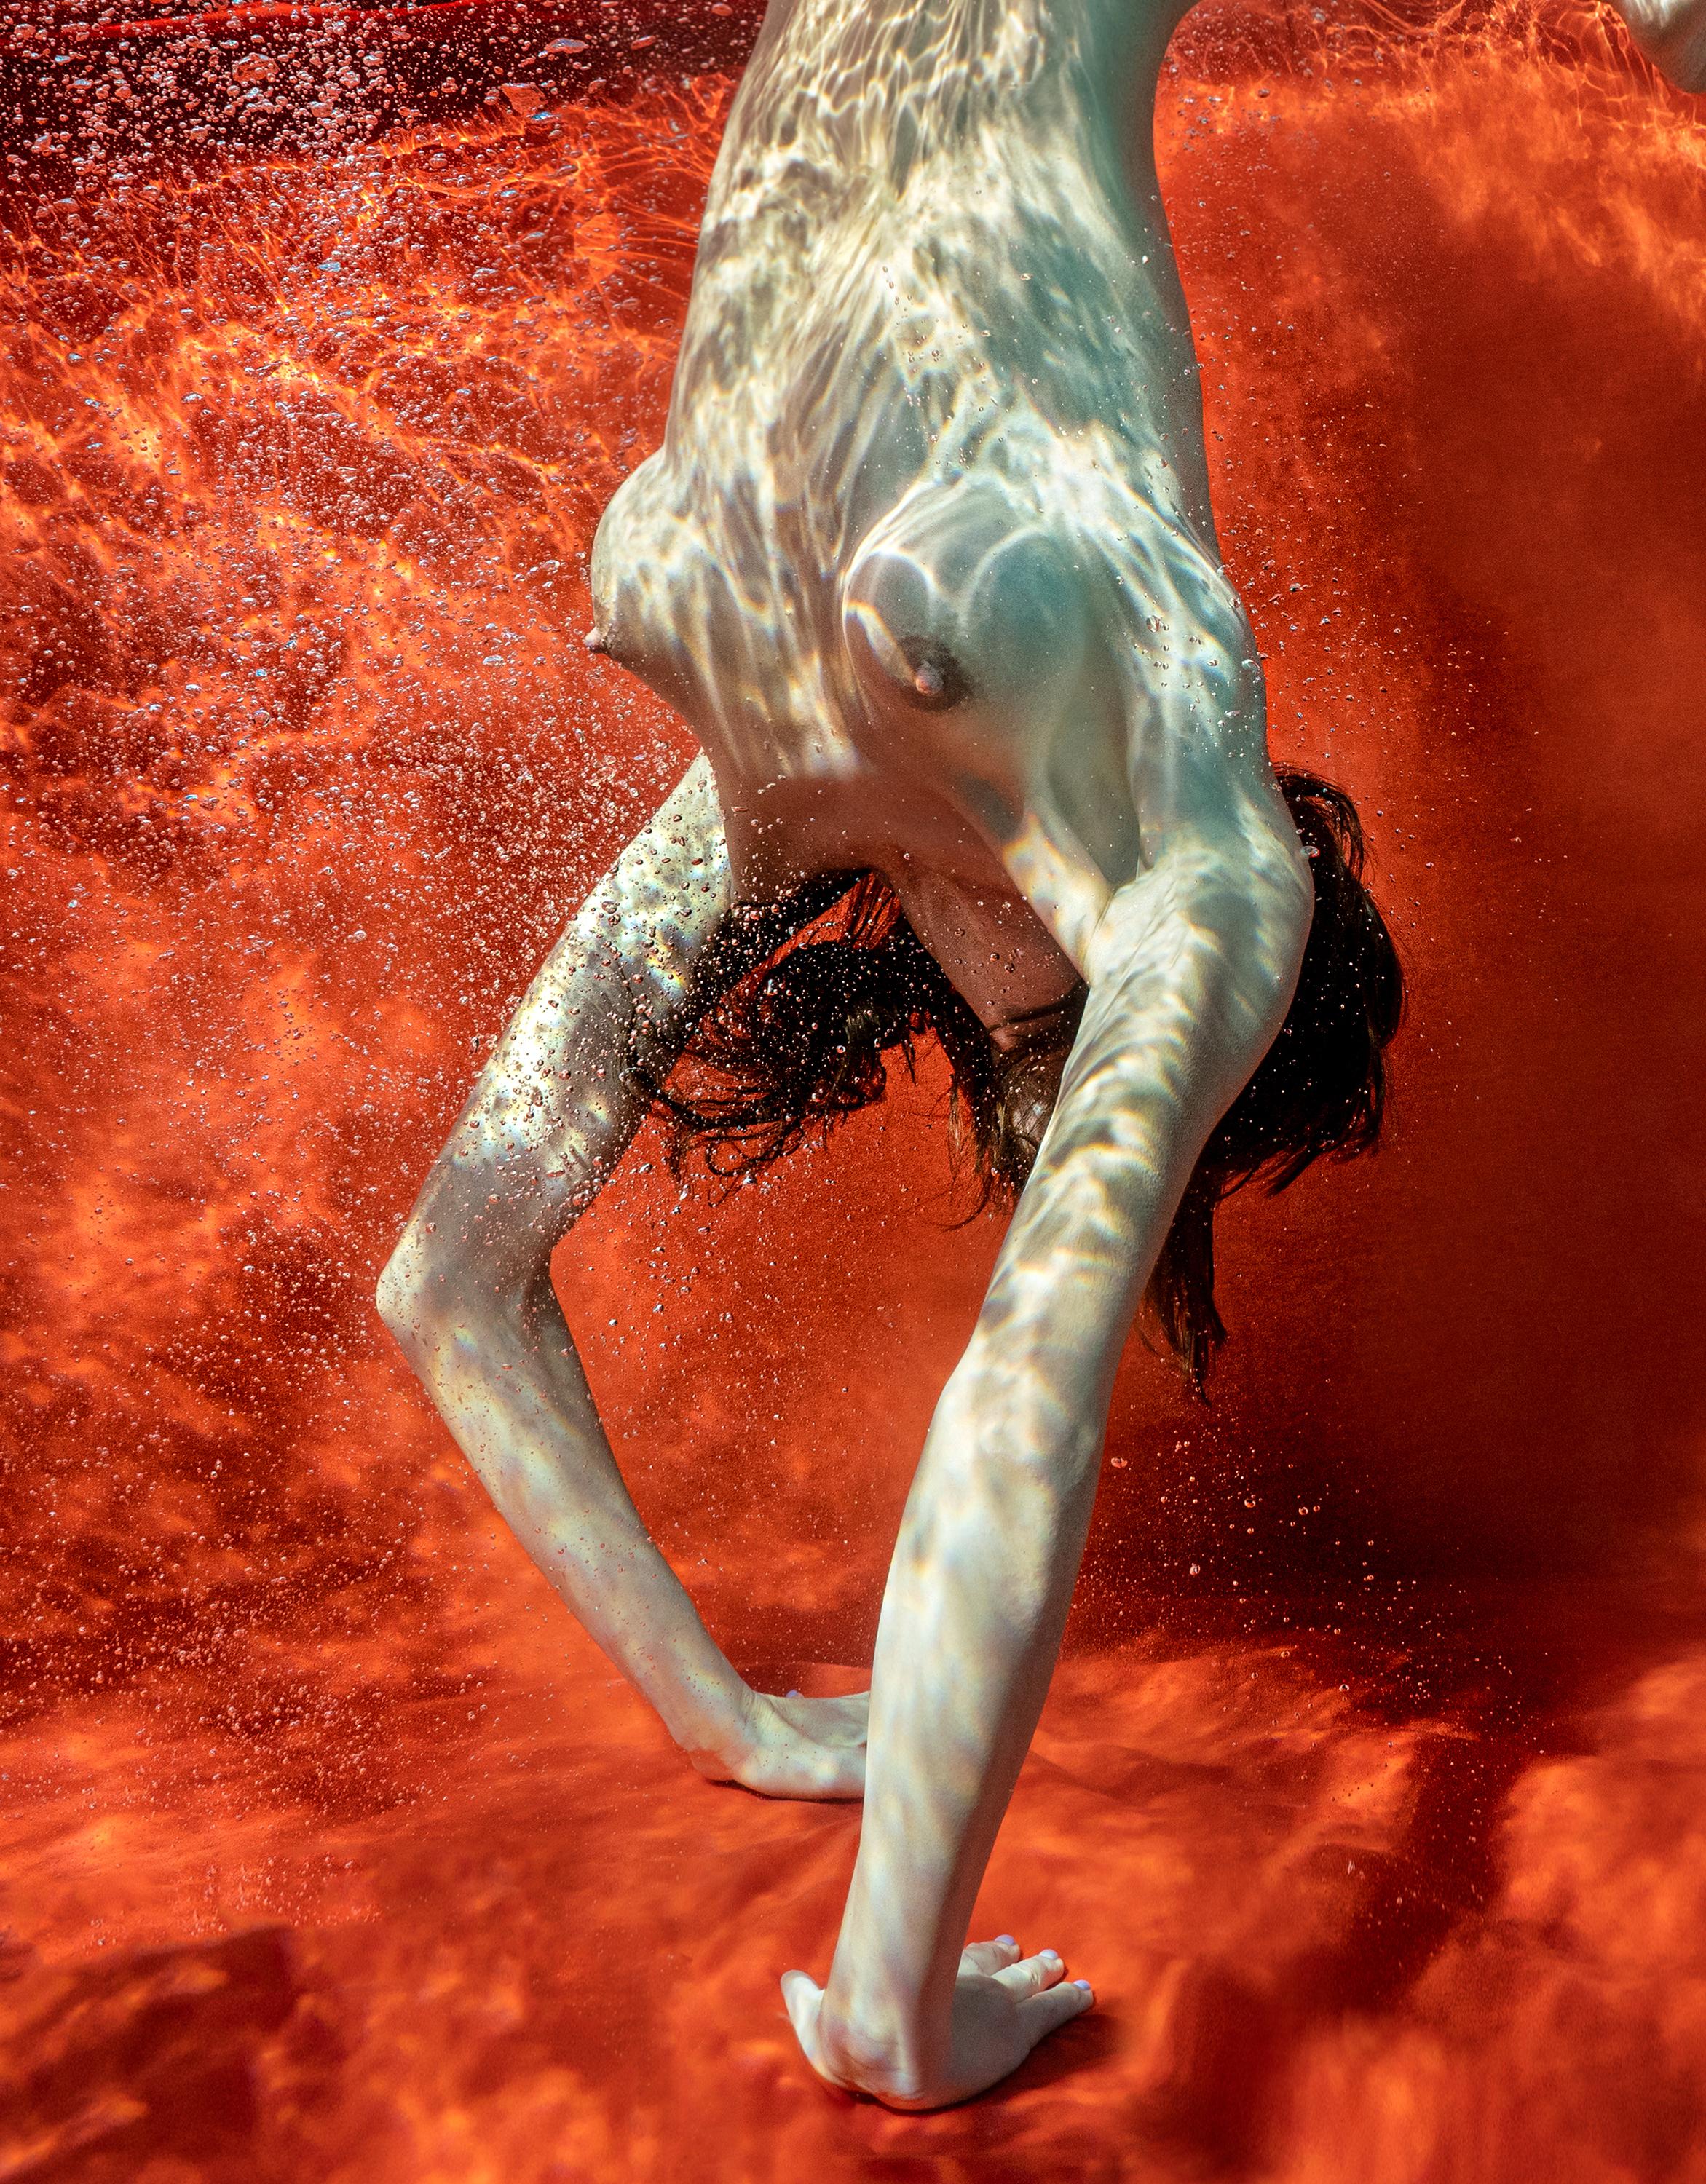 Blood and Milk VIII - underwater nude photograph - archival pigment print 57x43